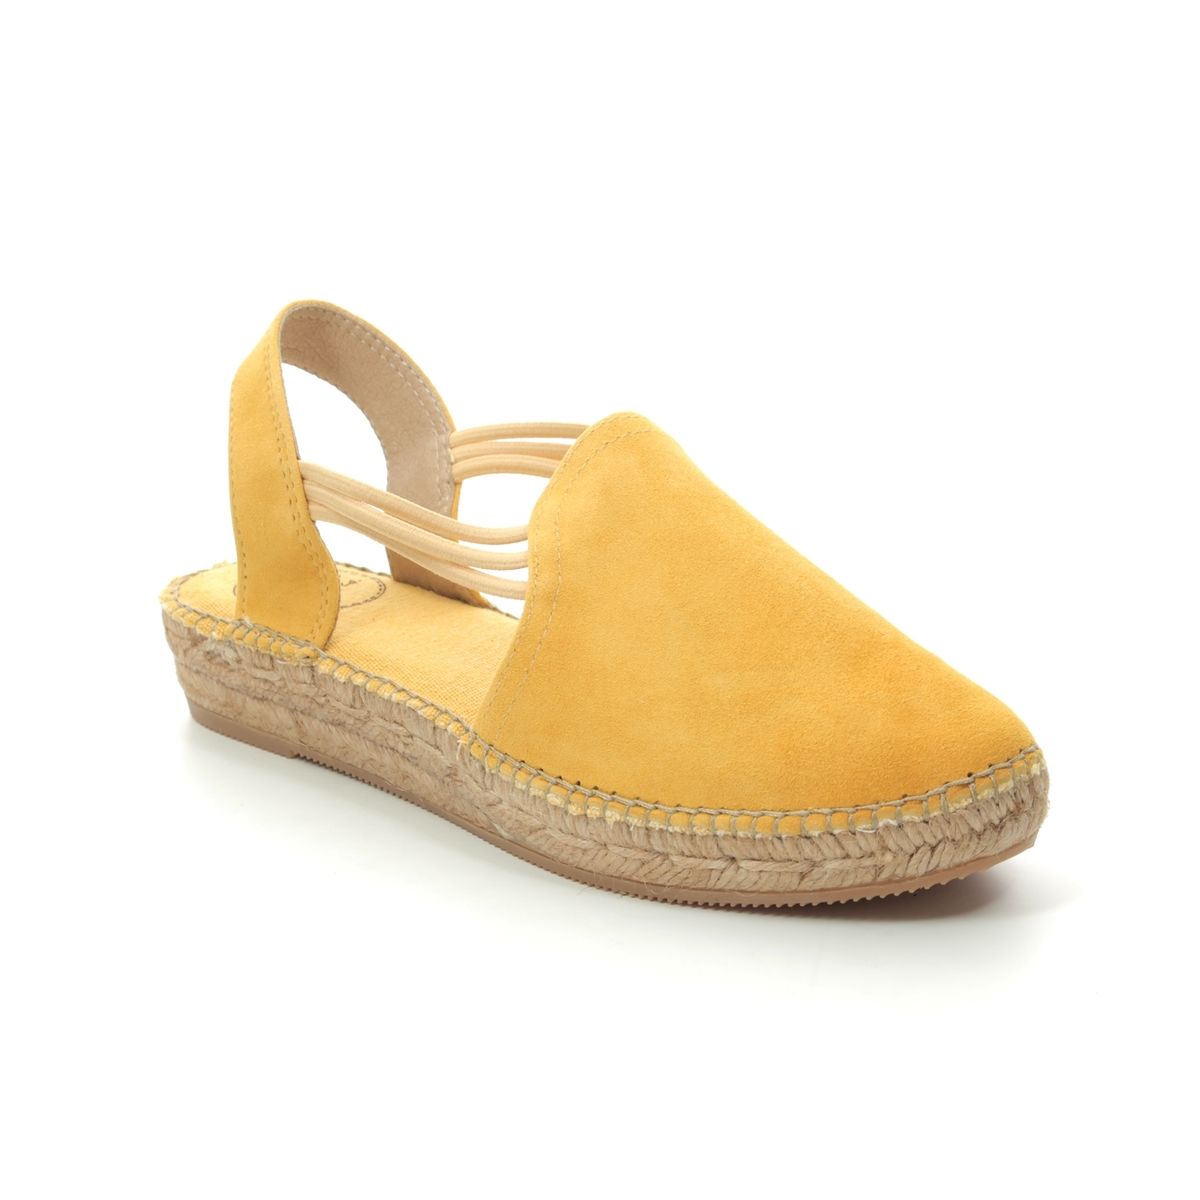 Toni Pons Nuria In Yellow Suede 0110-08 In Size 38 In Plain Yellow Suede